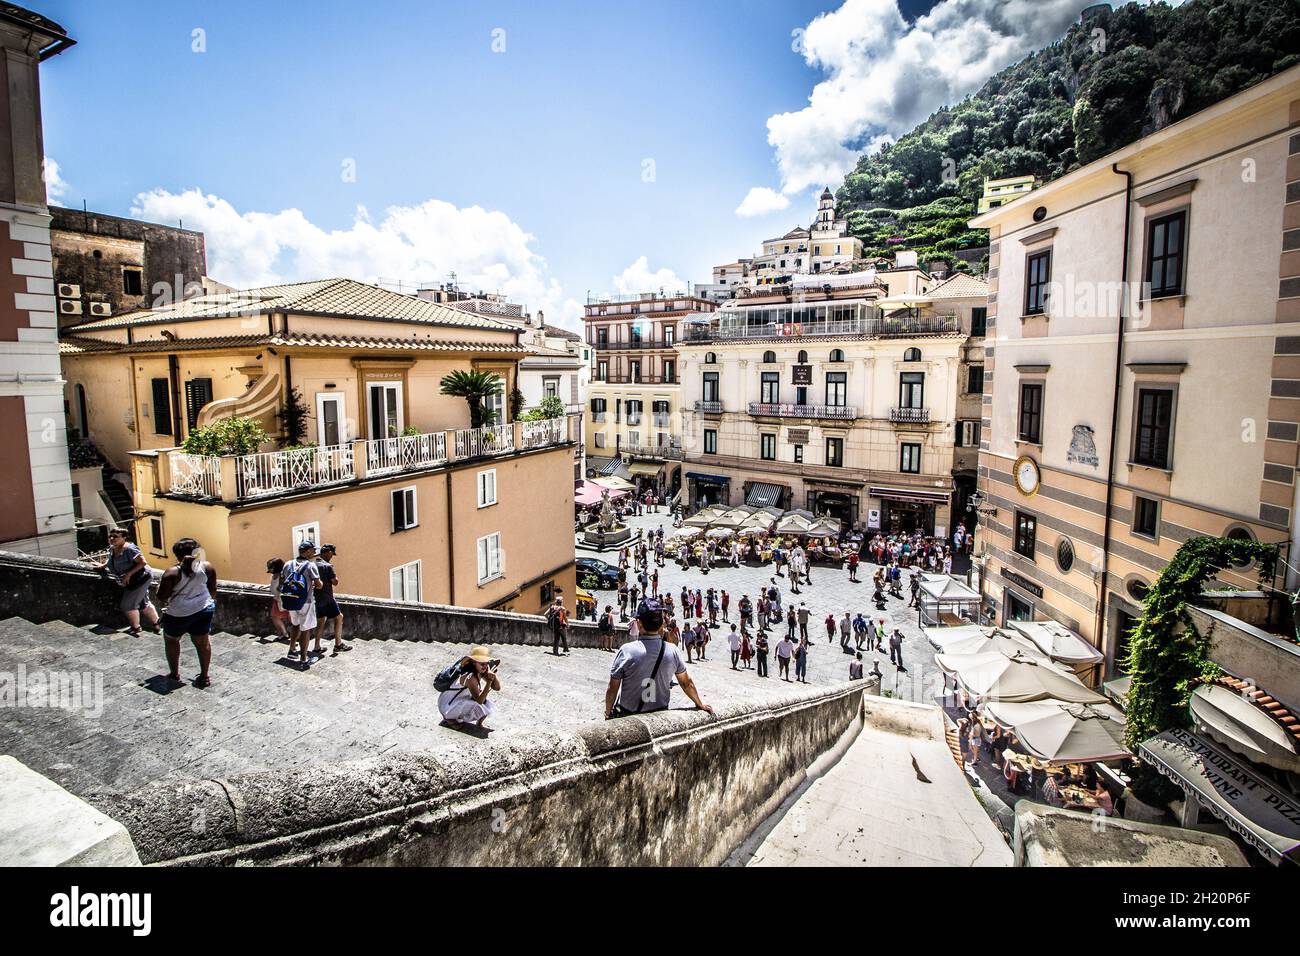 Amalfi is the main town of the coast on which it is located Amalfi Coast), and is today an important tourist destination. Stock Photo